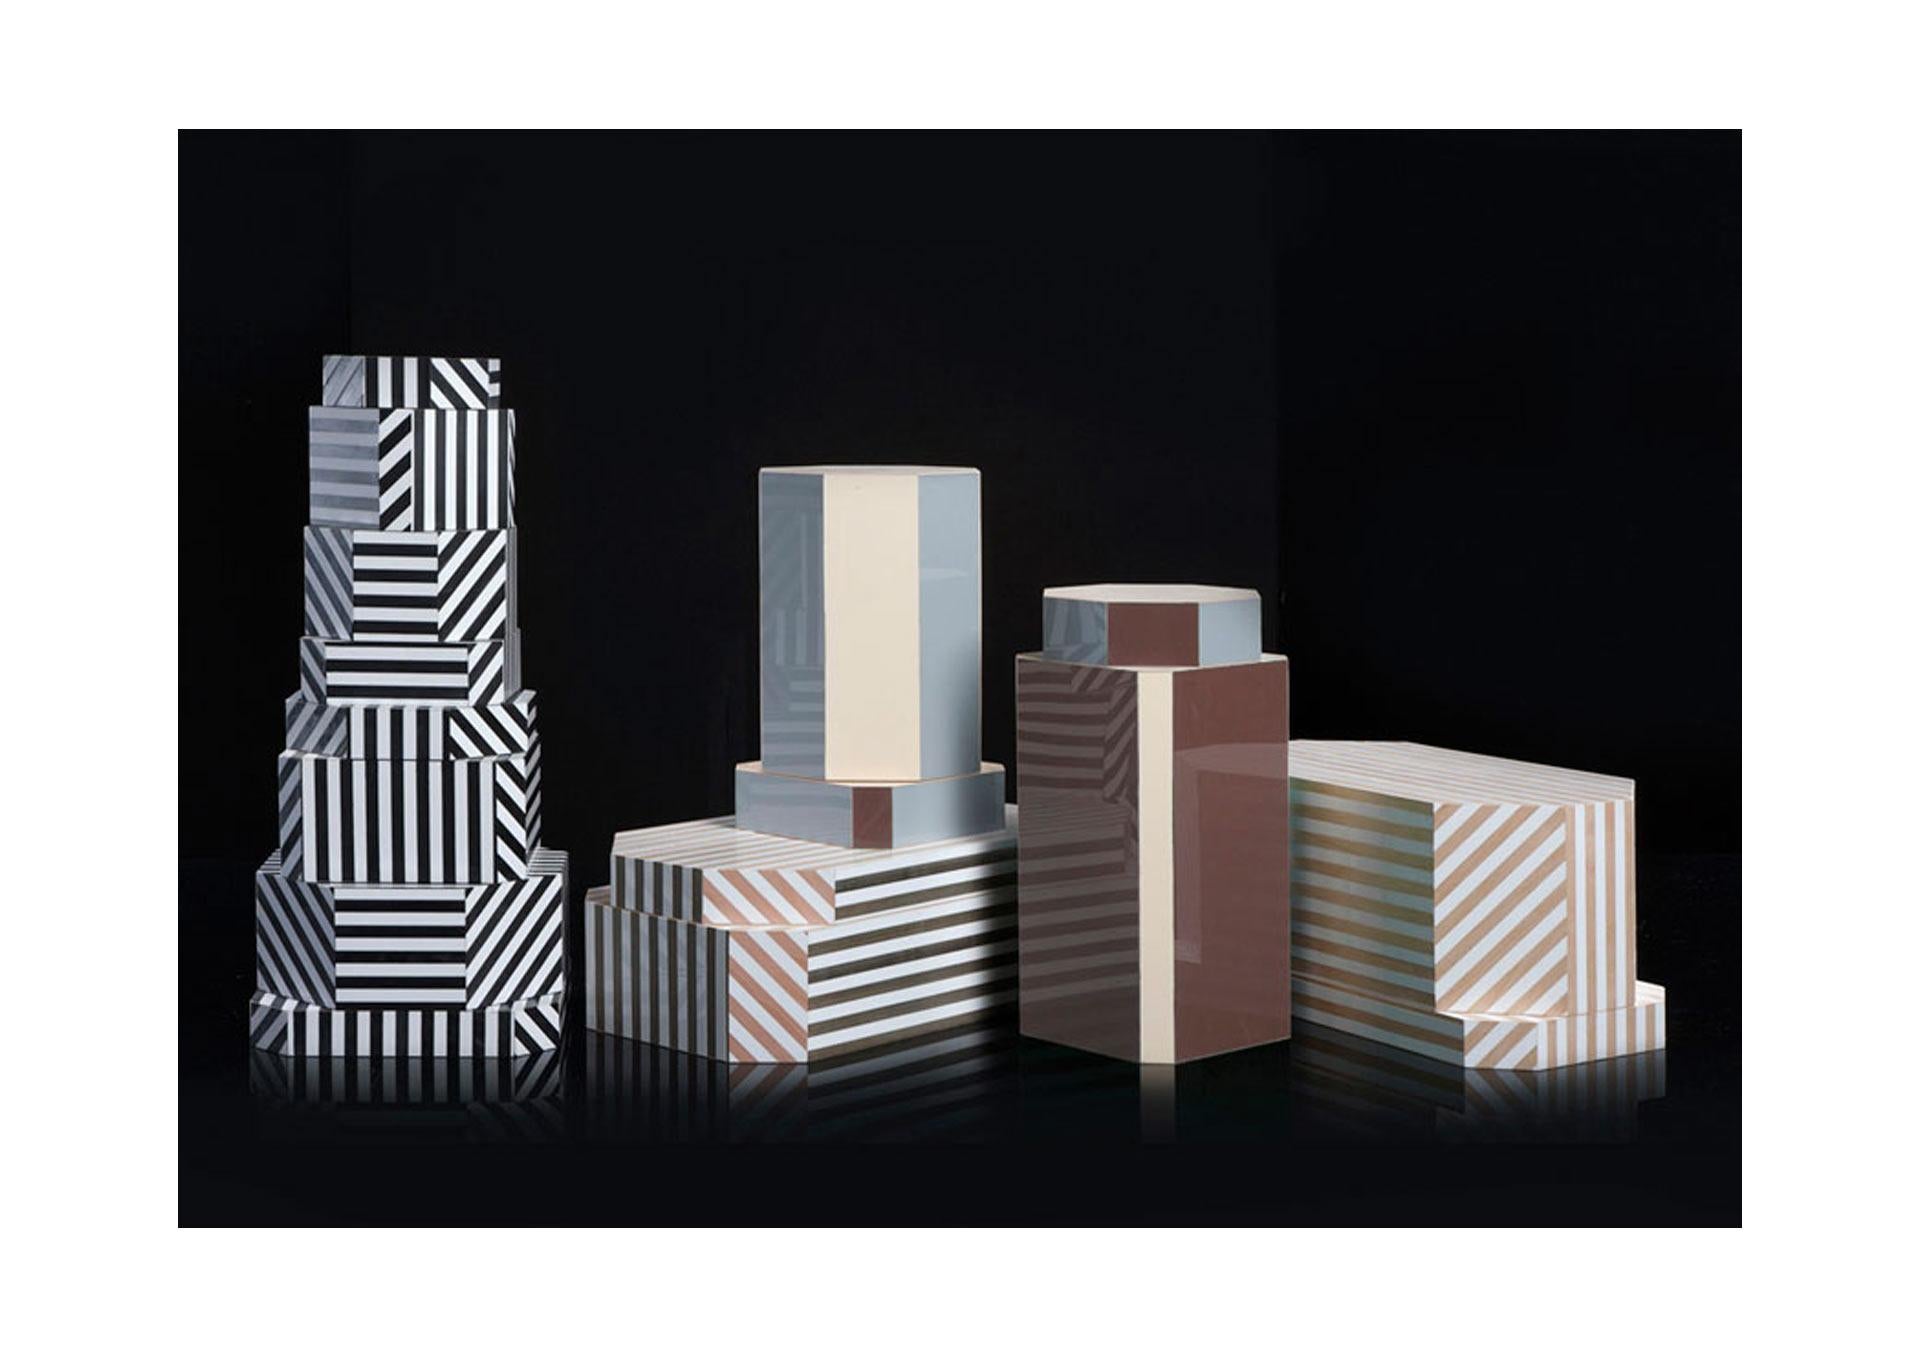 Other Pixel Ziggurat Boxes by Oeuffice